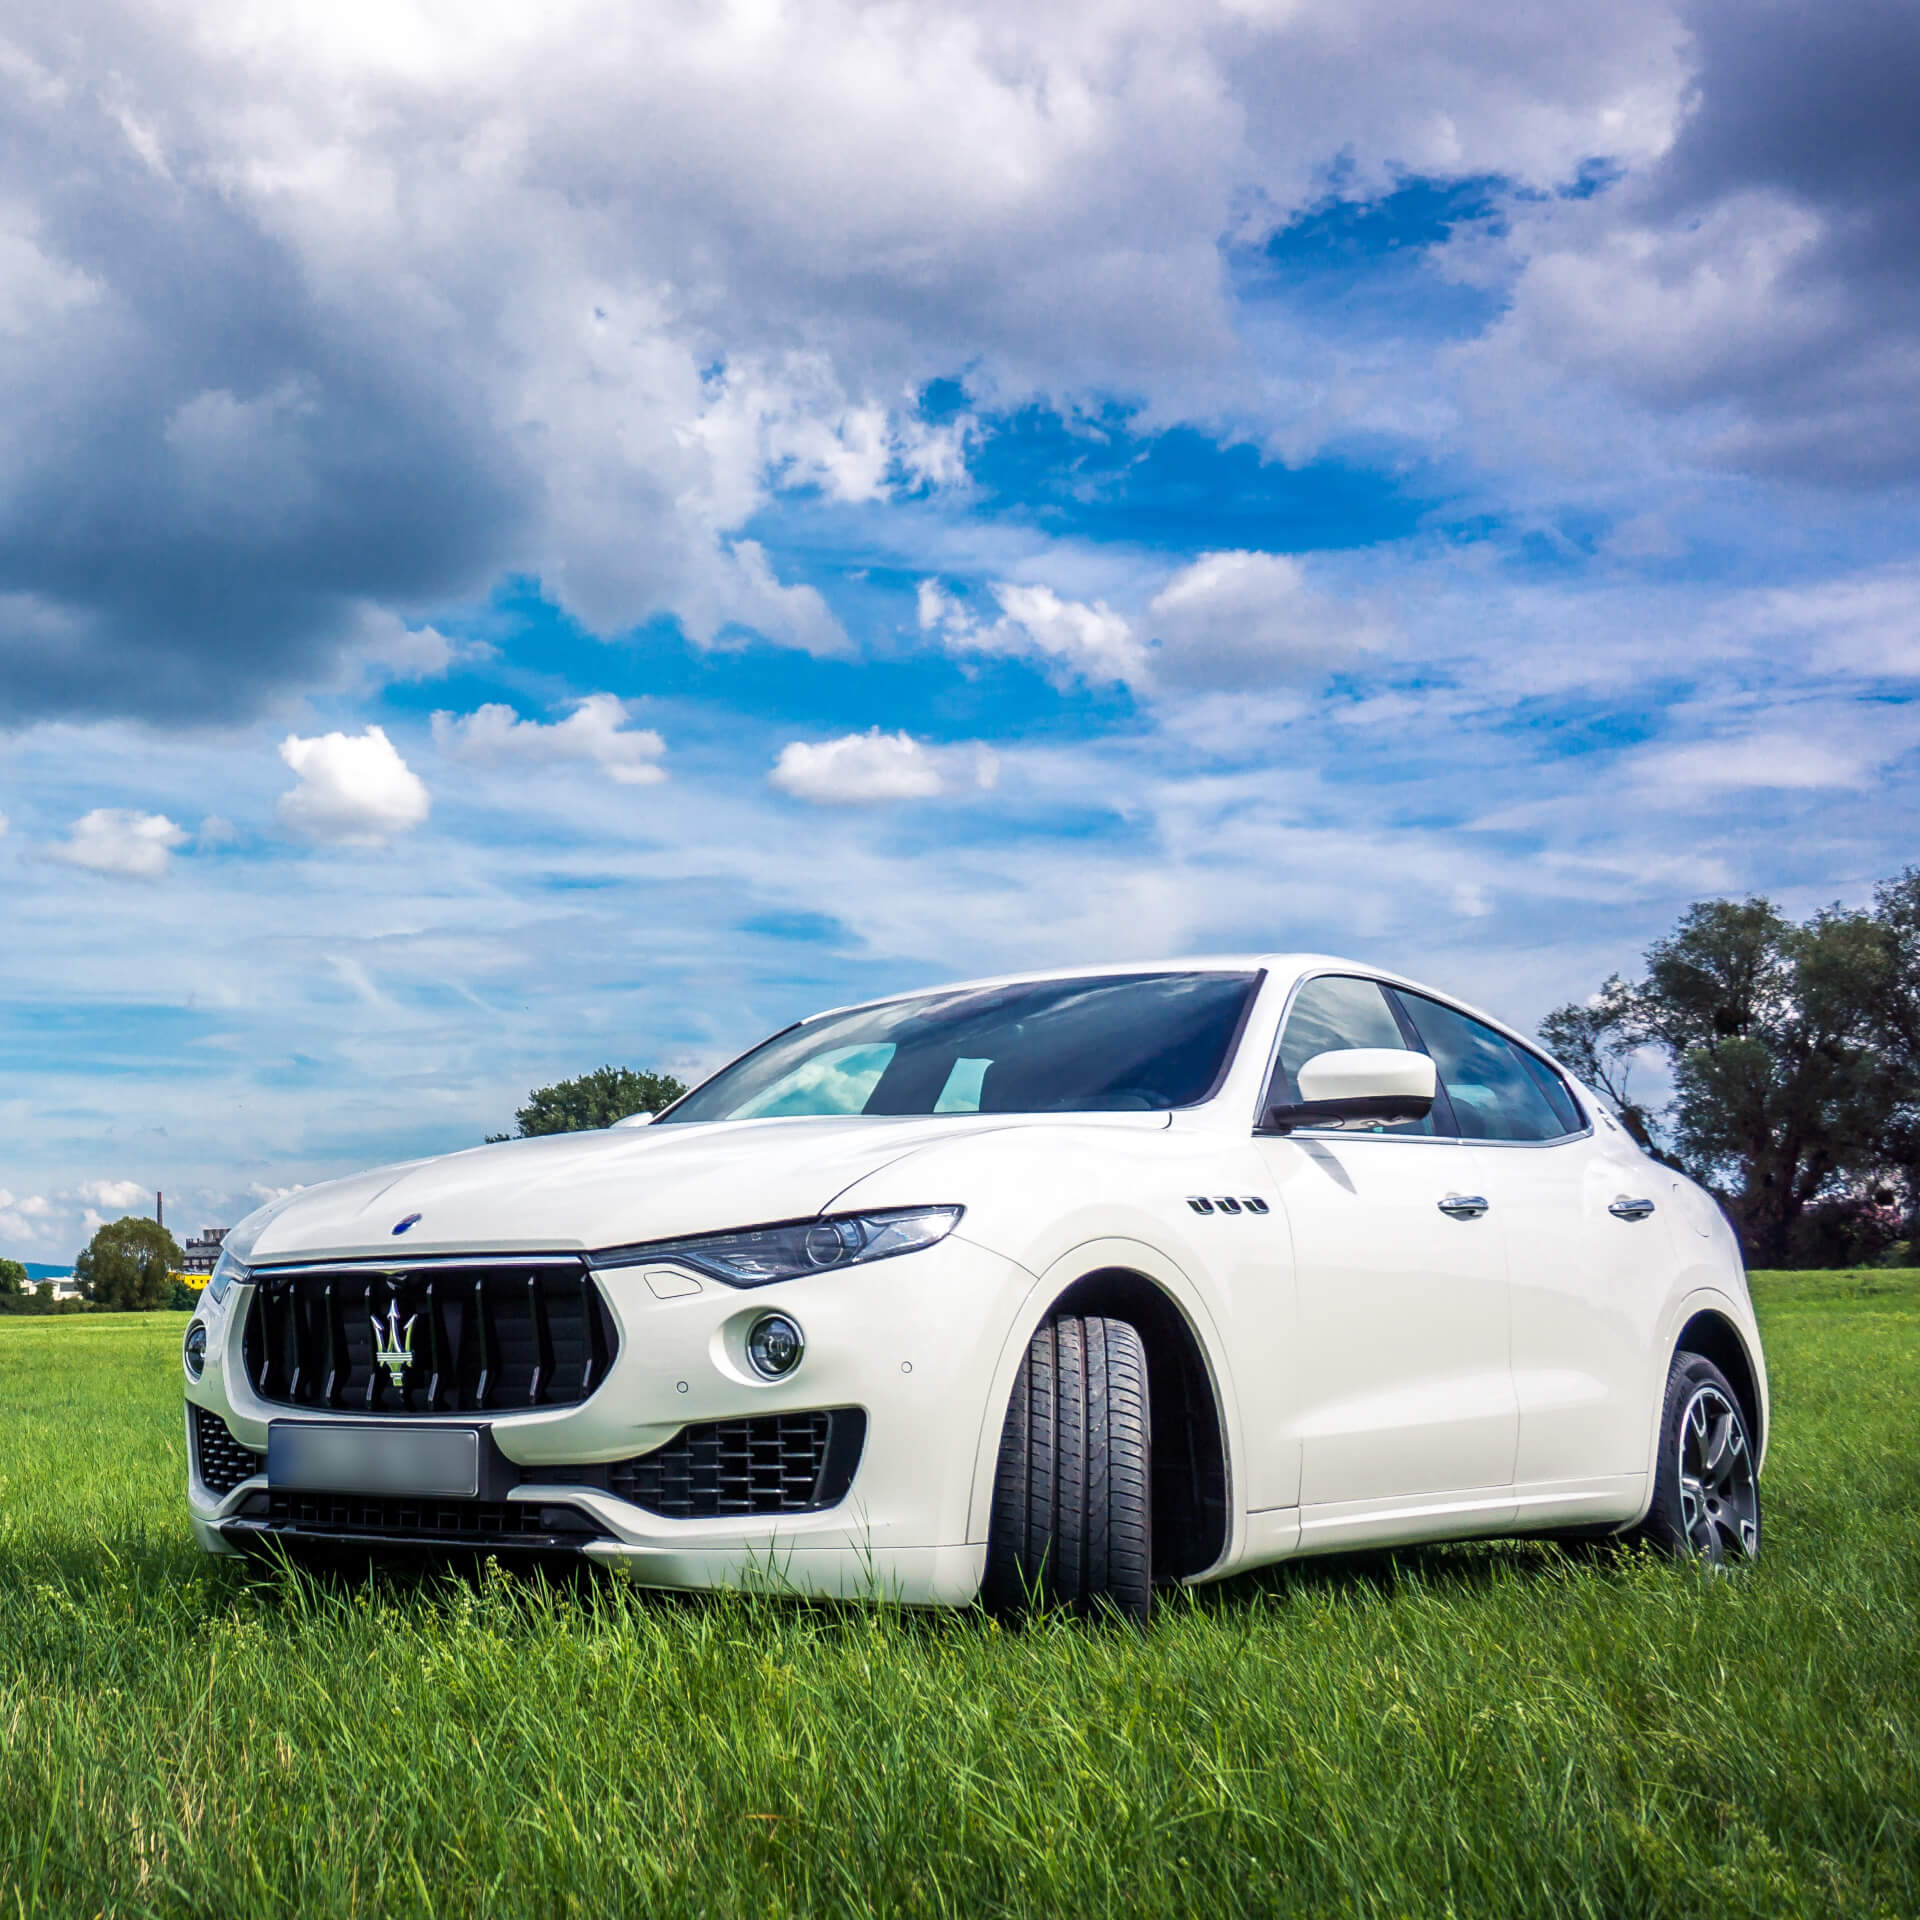 Direct4x4 accessories for Maserati Levante vehicles with a photo of a white Maserati Levante parked in a field under a blue sky